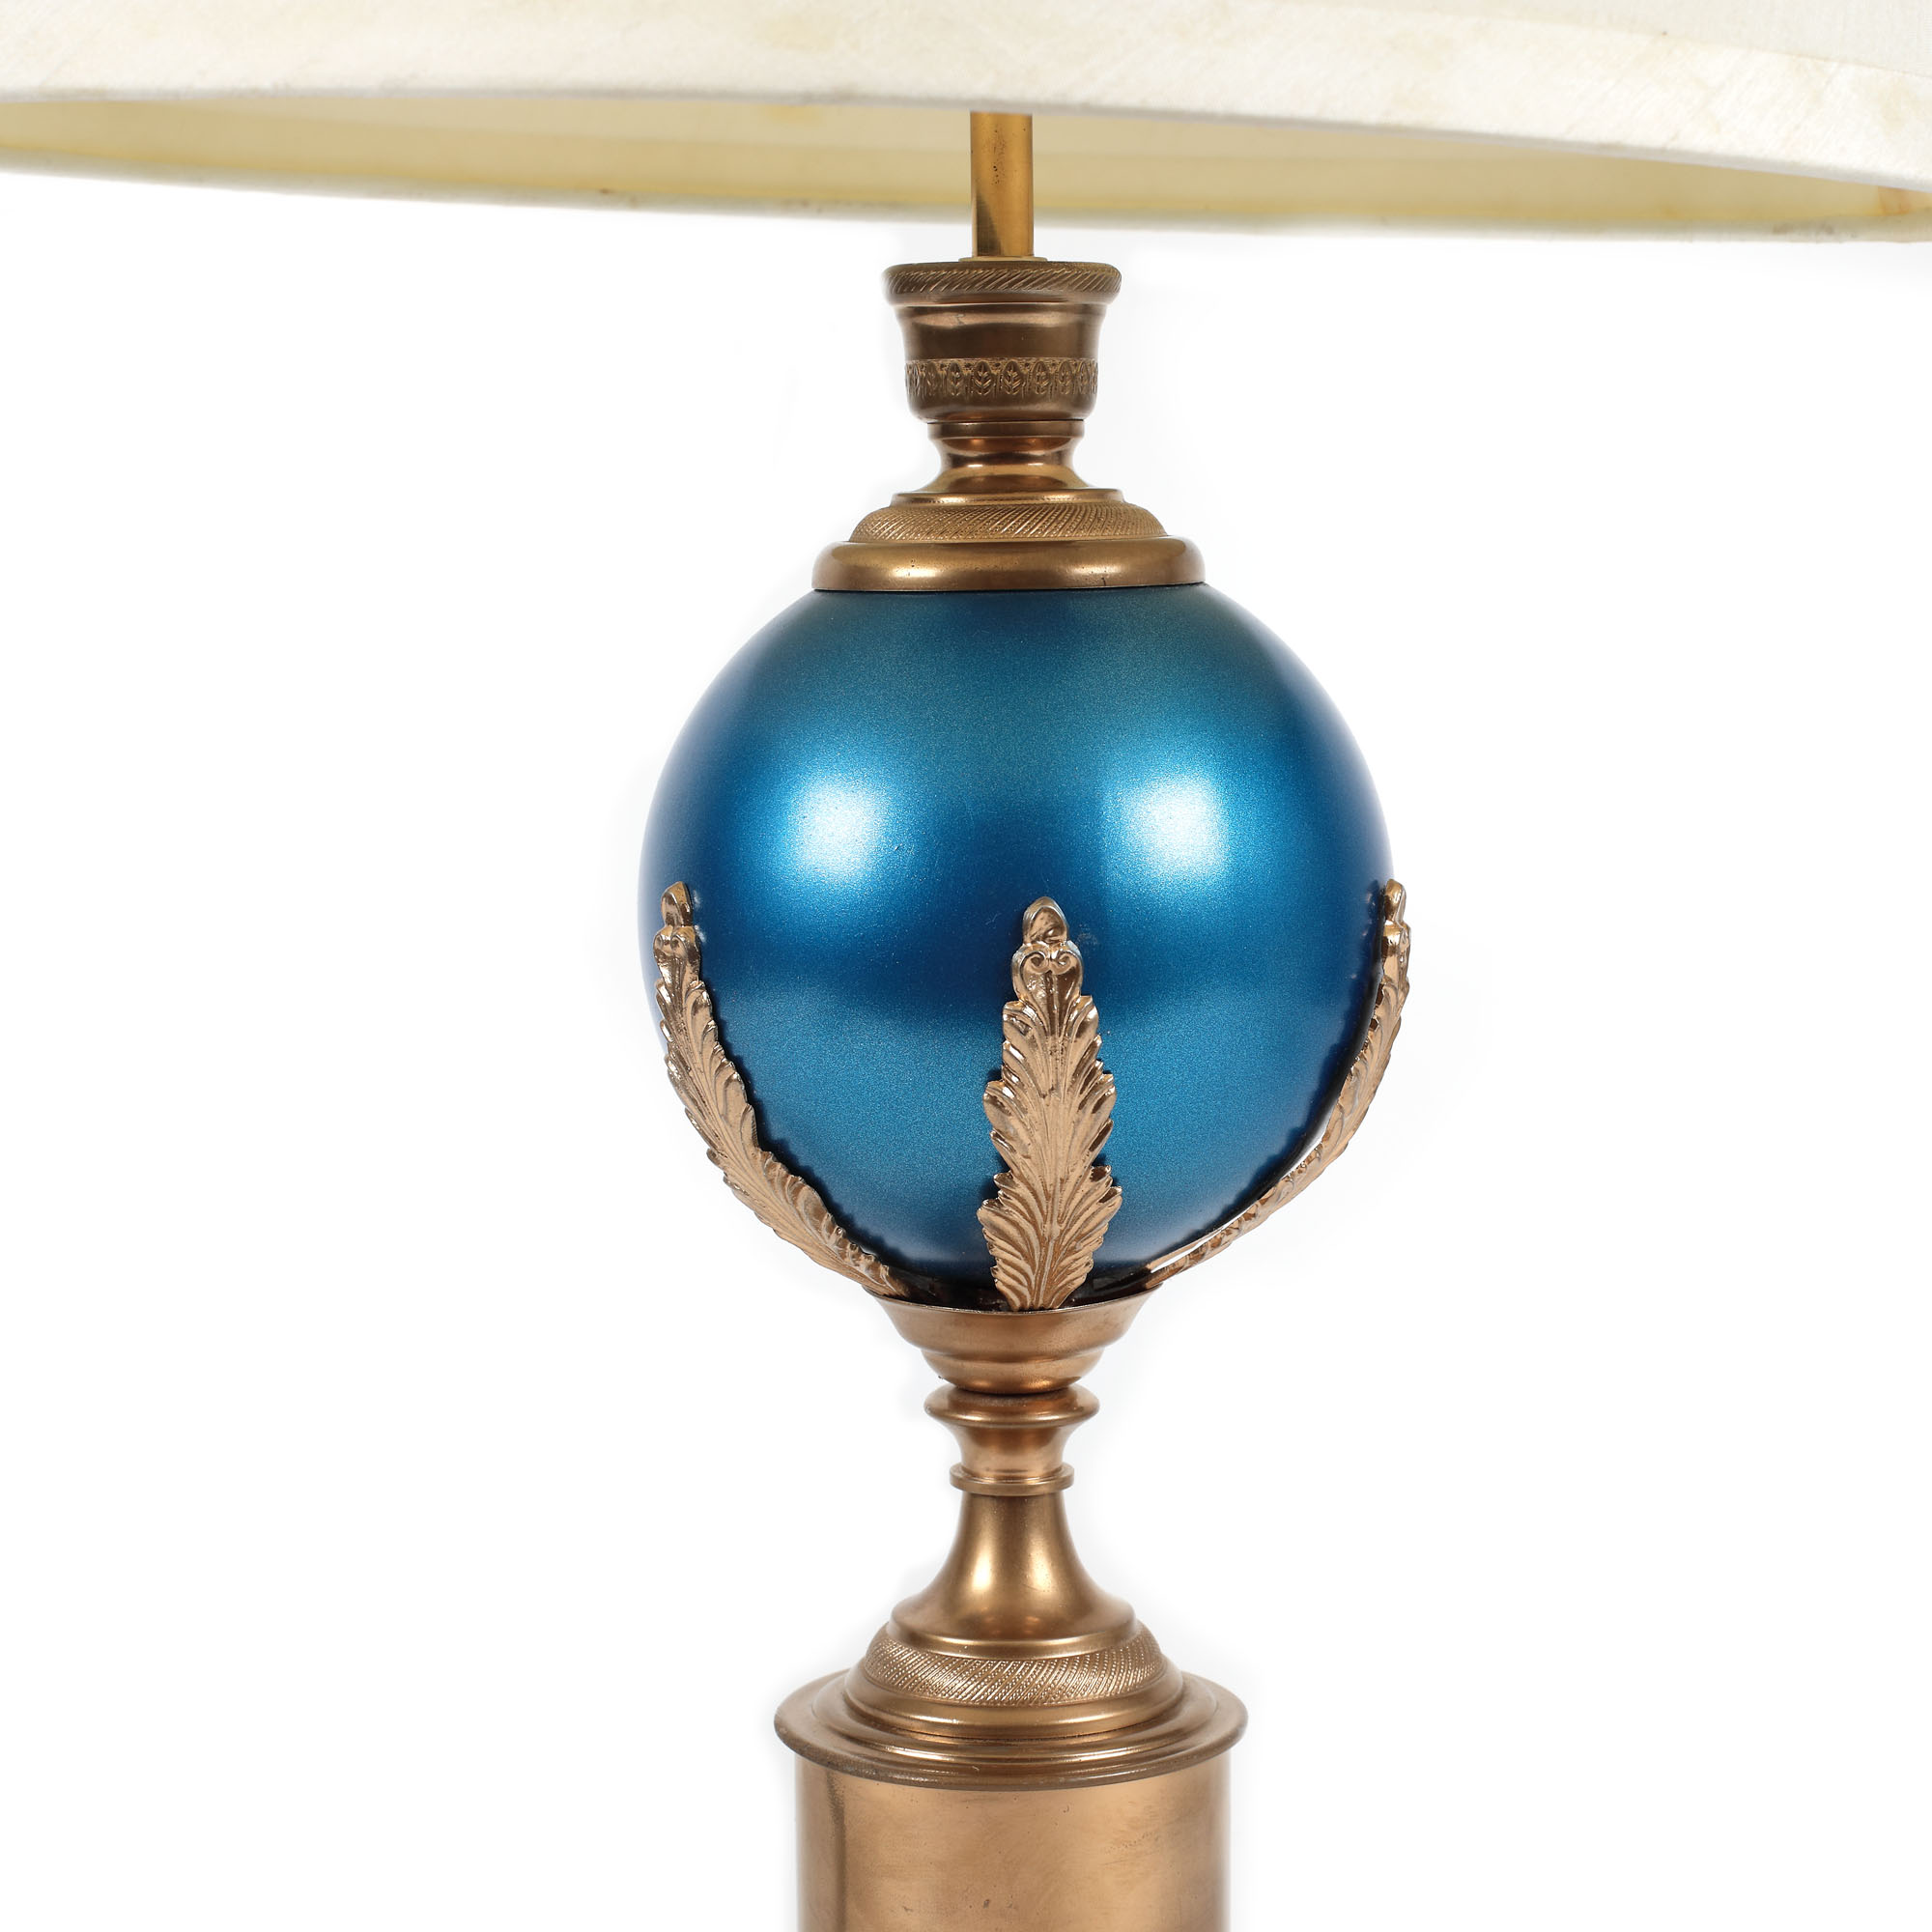 French workshop, Table lamp made by Maison Charles, gilded bronze, decorated with plant elements and - Image 3 of 5